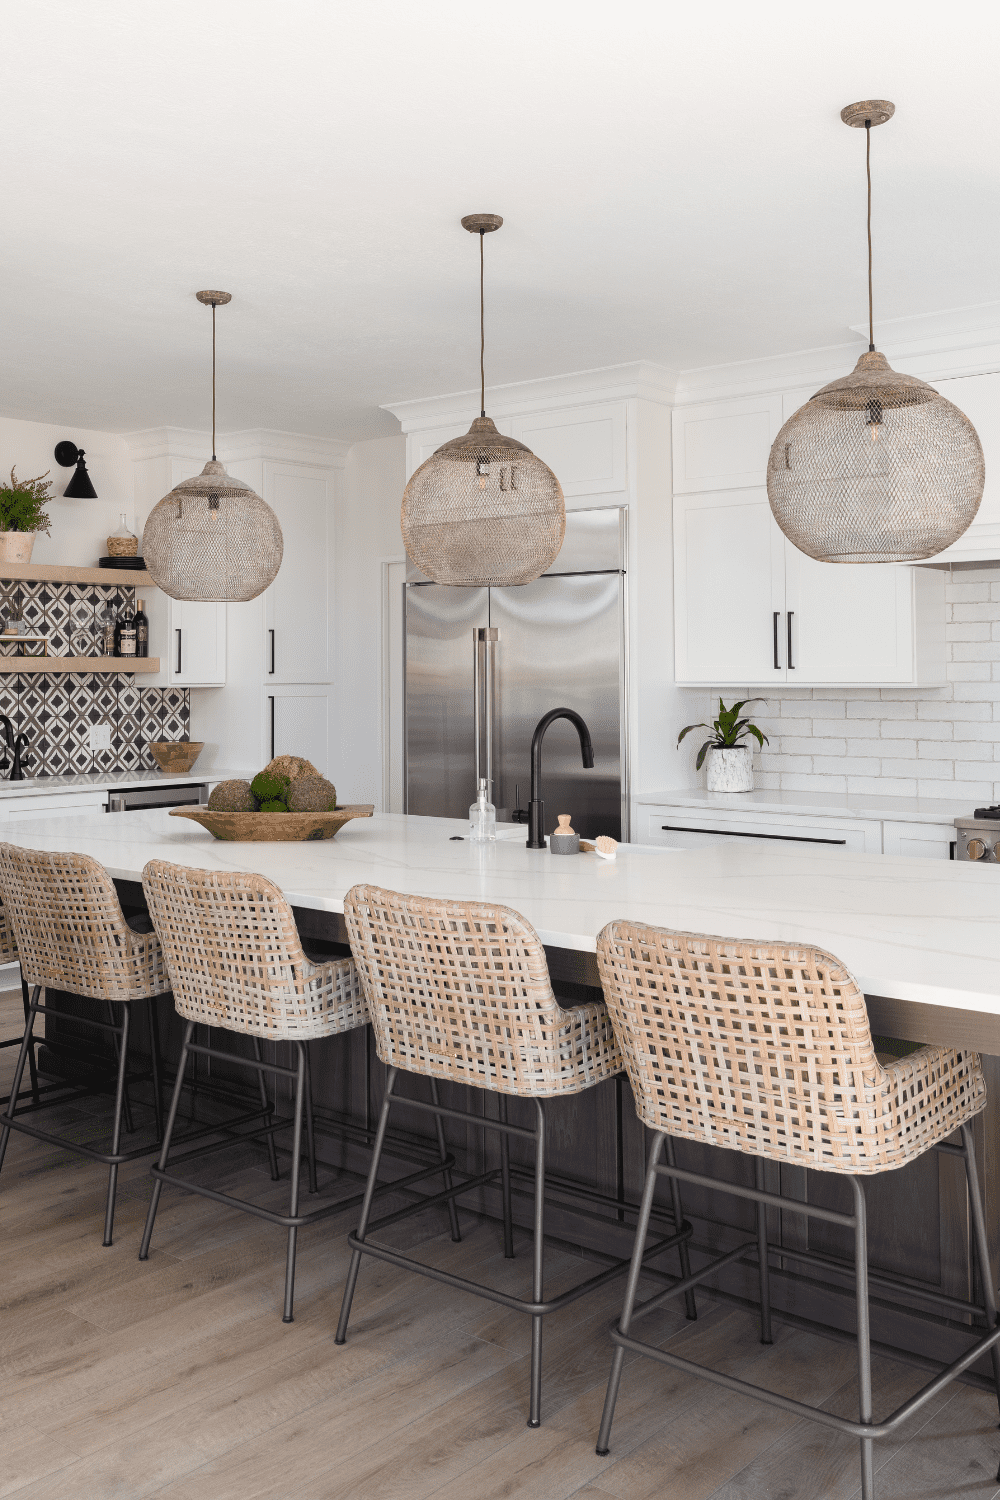 Nicholas Design Build | A kitchen with a large island and wicker chairs.